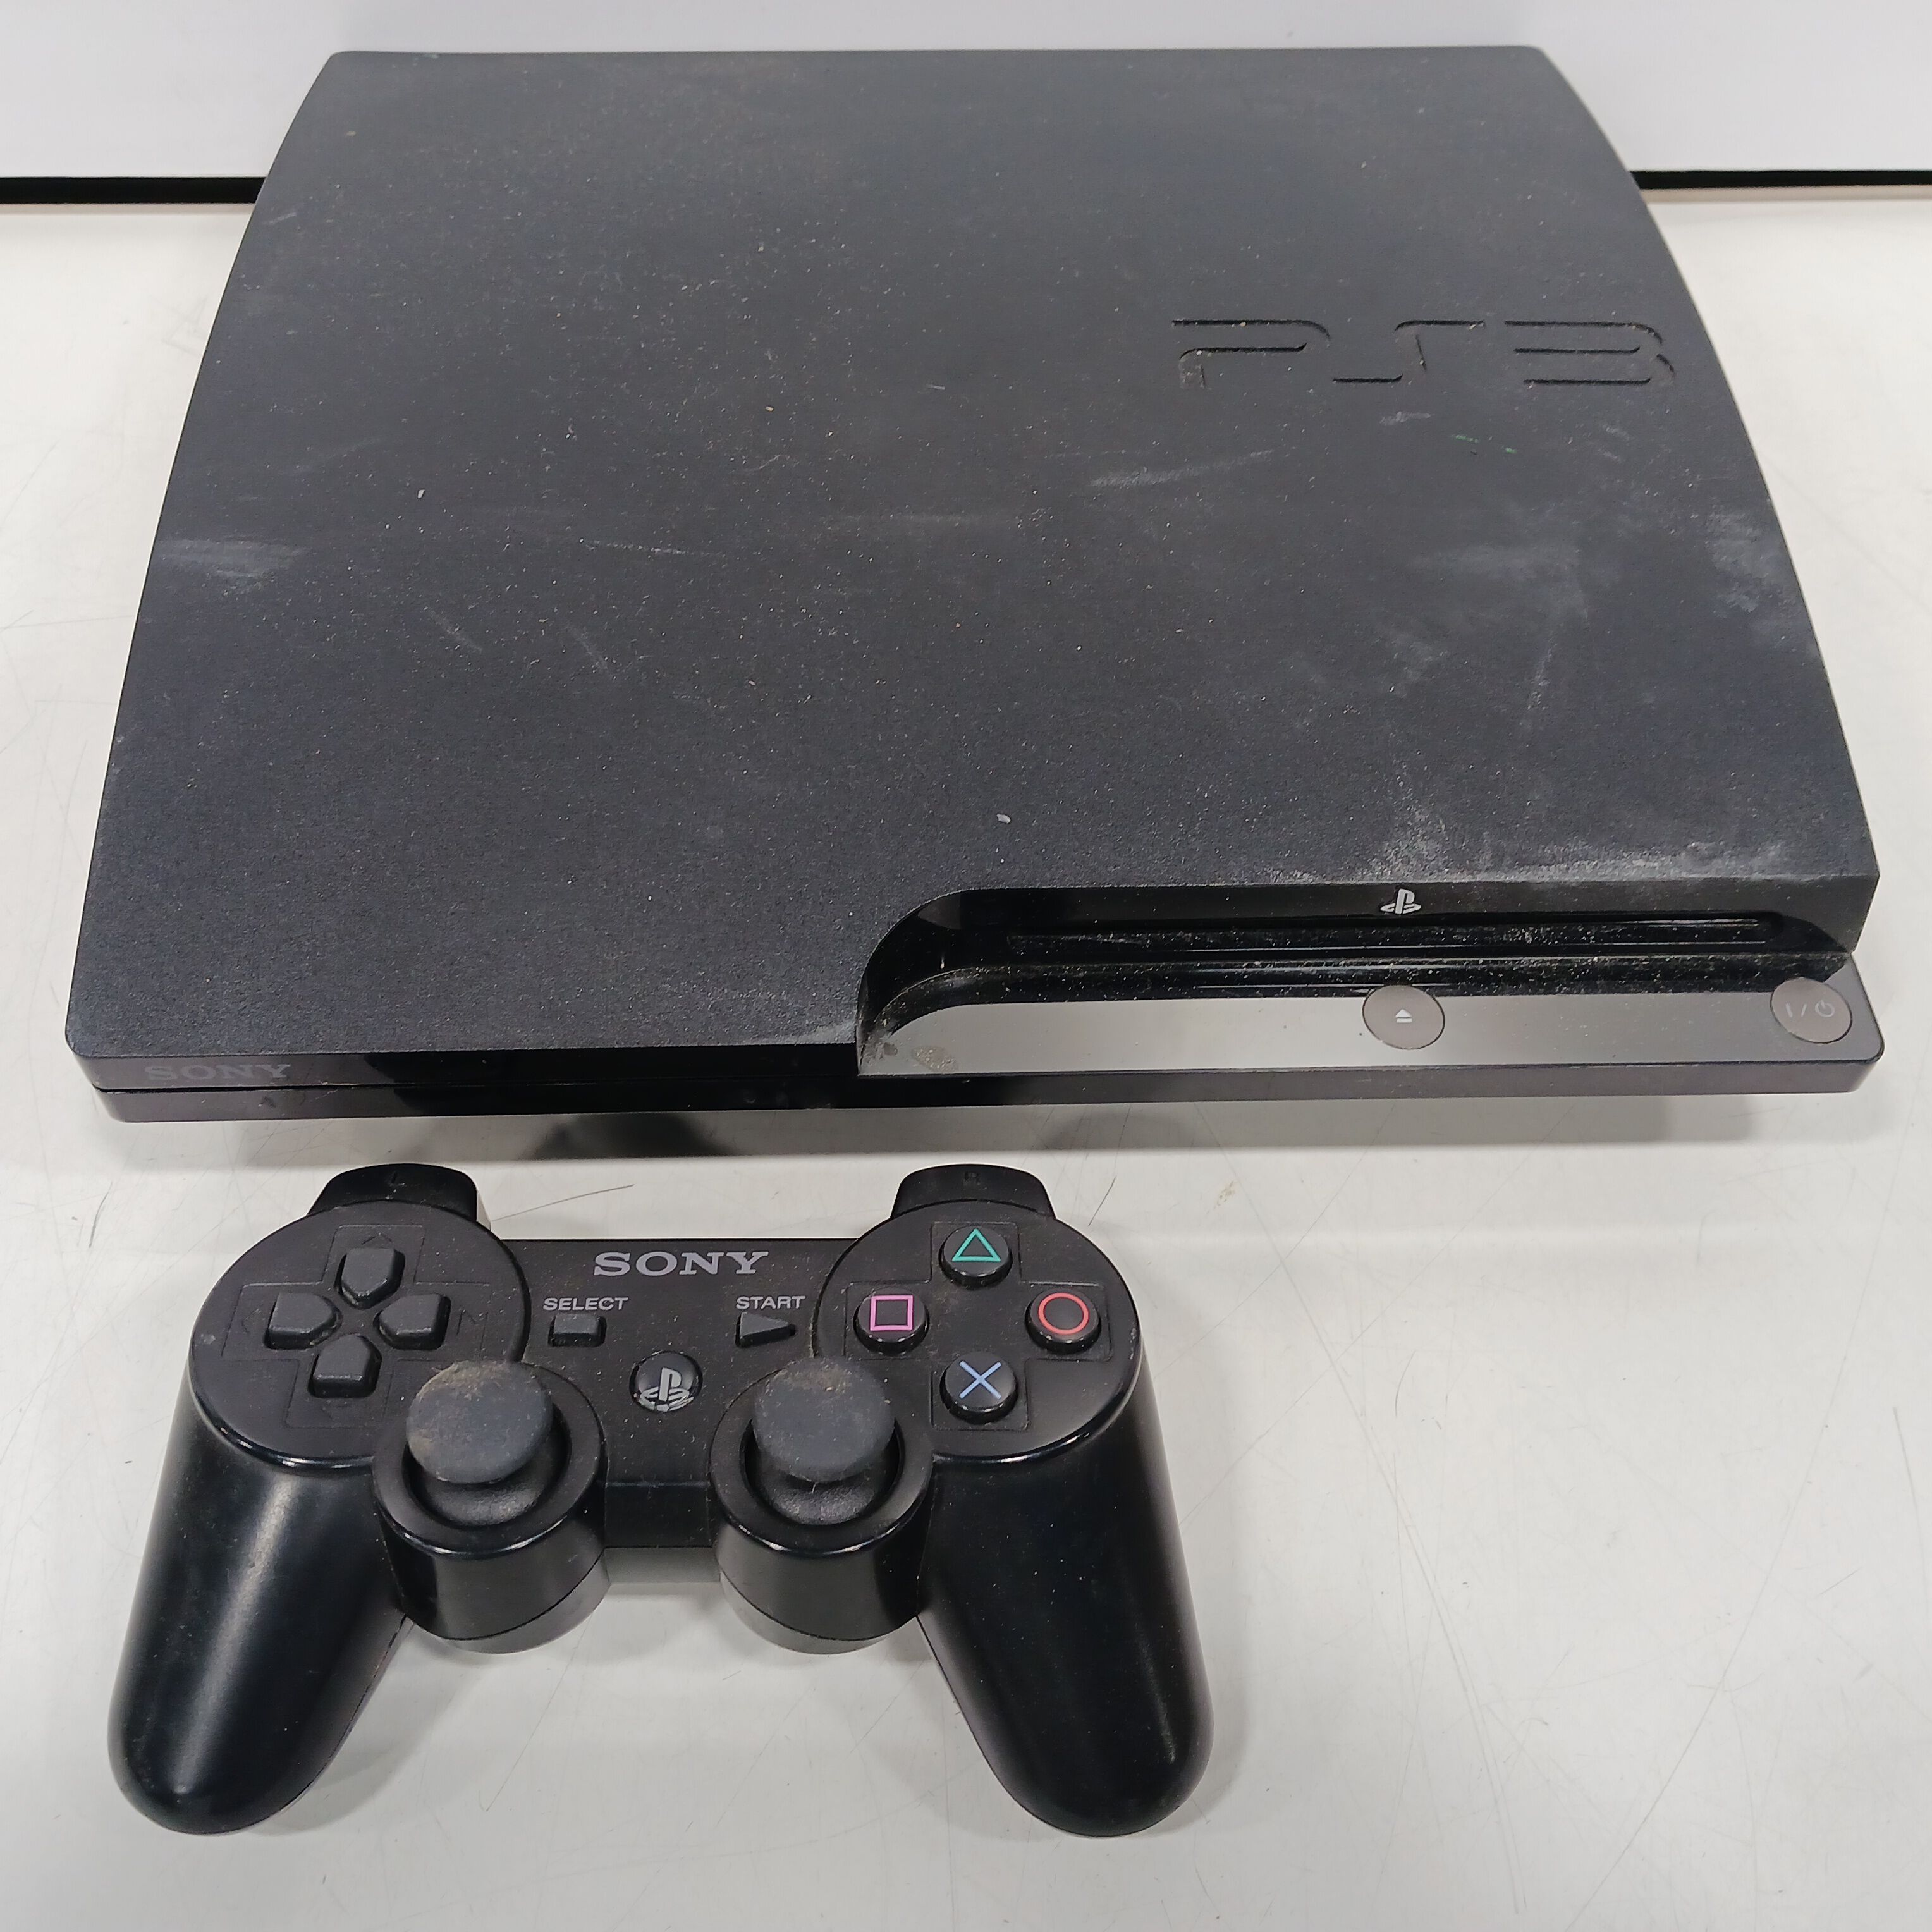 Buy the Playstation 3 Console w/ Controller | GoodwillFinds